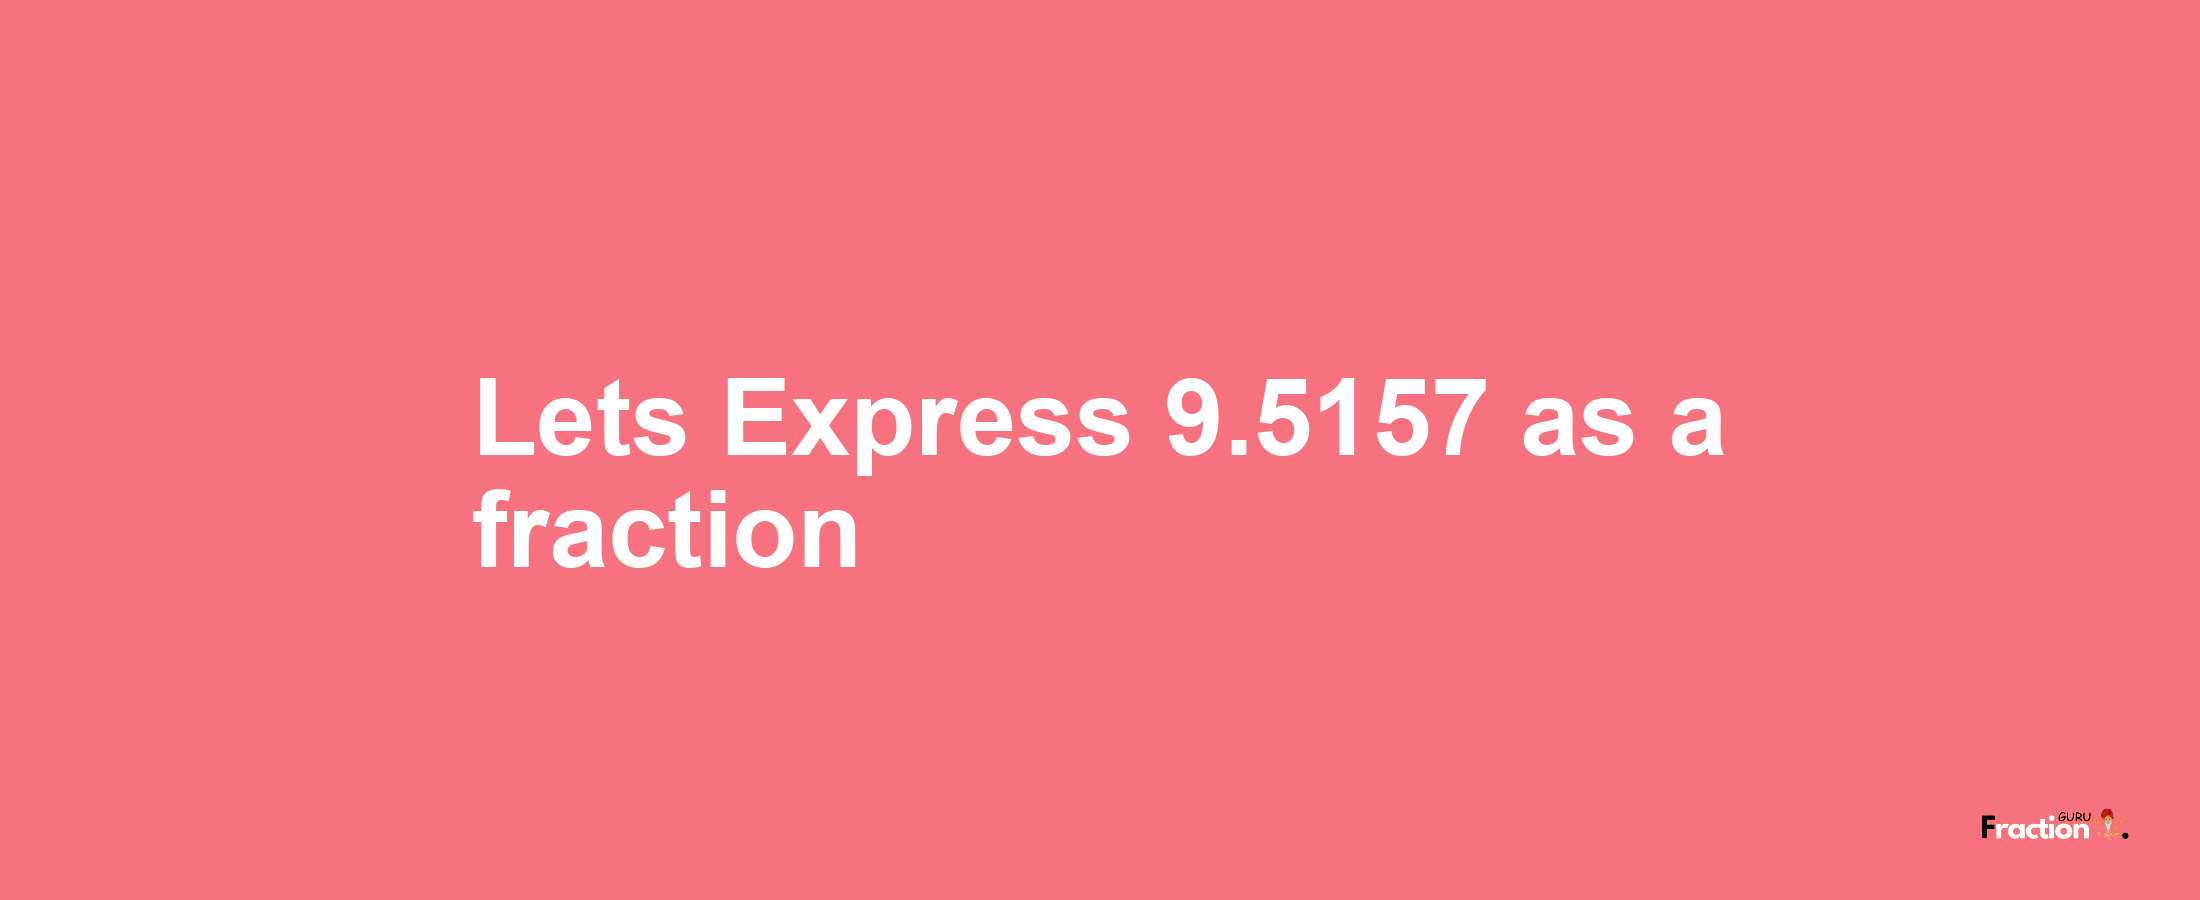 Lets Express 9.5157 as afraction